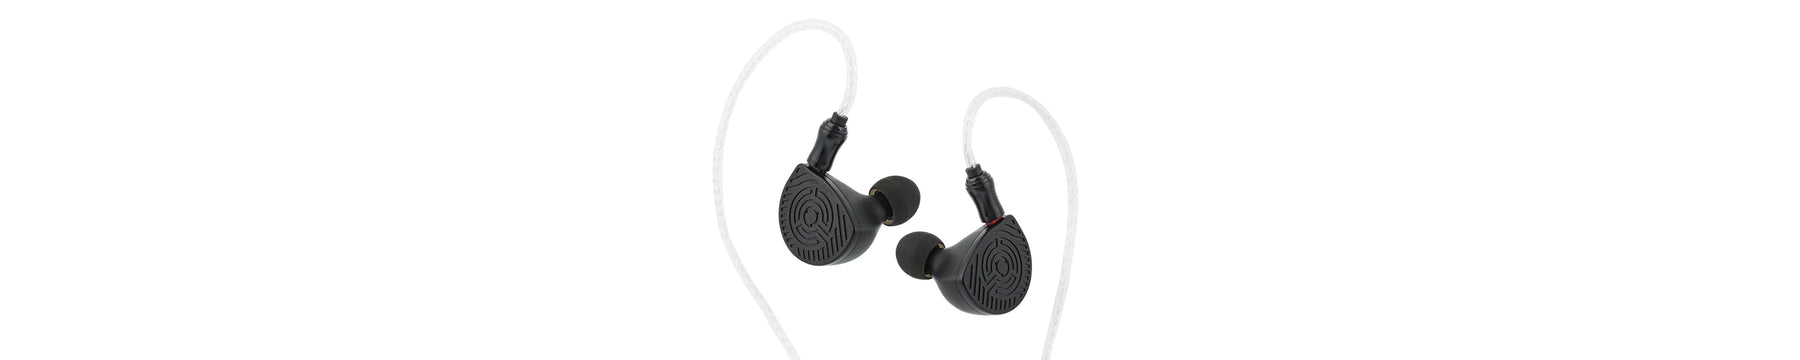 Shozy Introduces P20: Premium In-Ear Monitors With Large 14.5mm PET Diaphragm Dynamic Driver